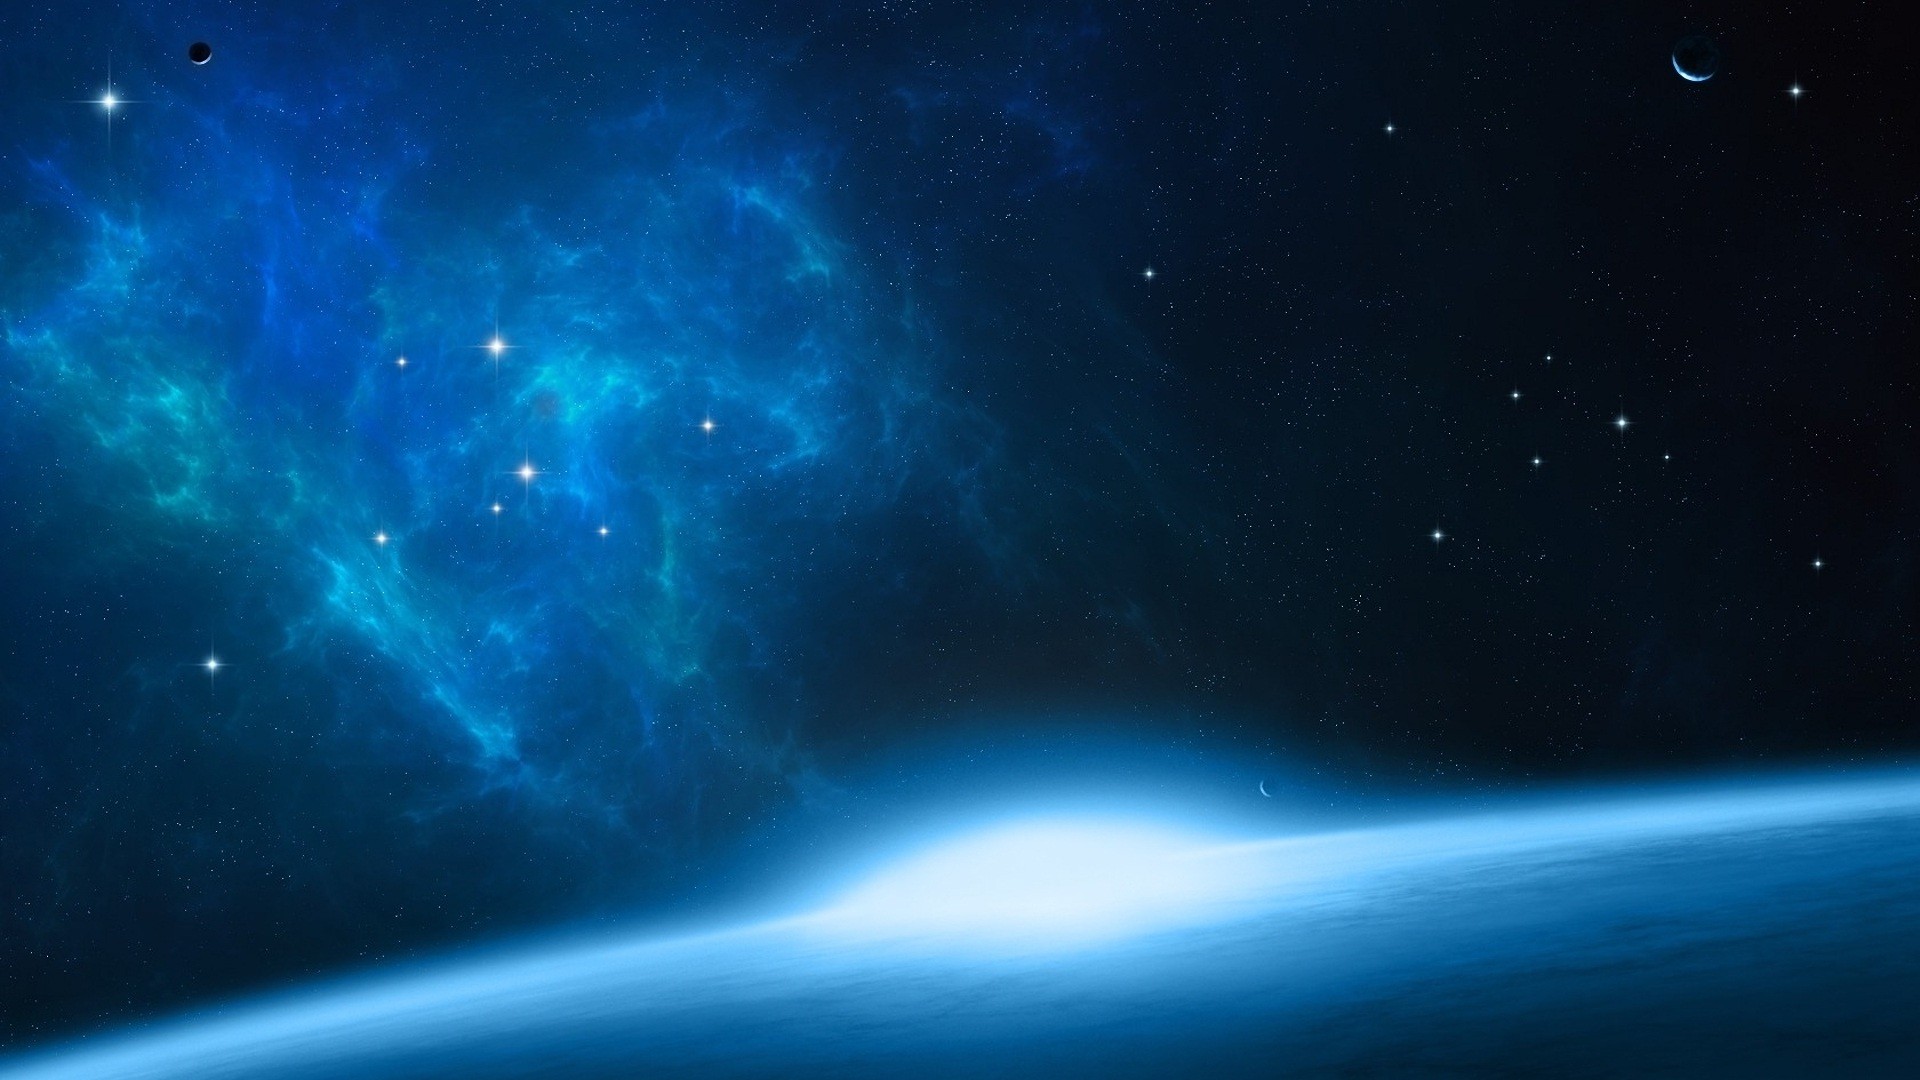 outer space wallpapers 33924 1920x1080jpg